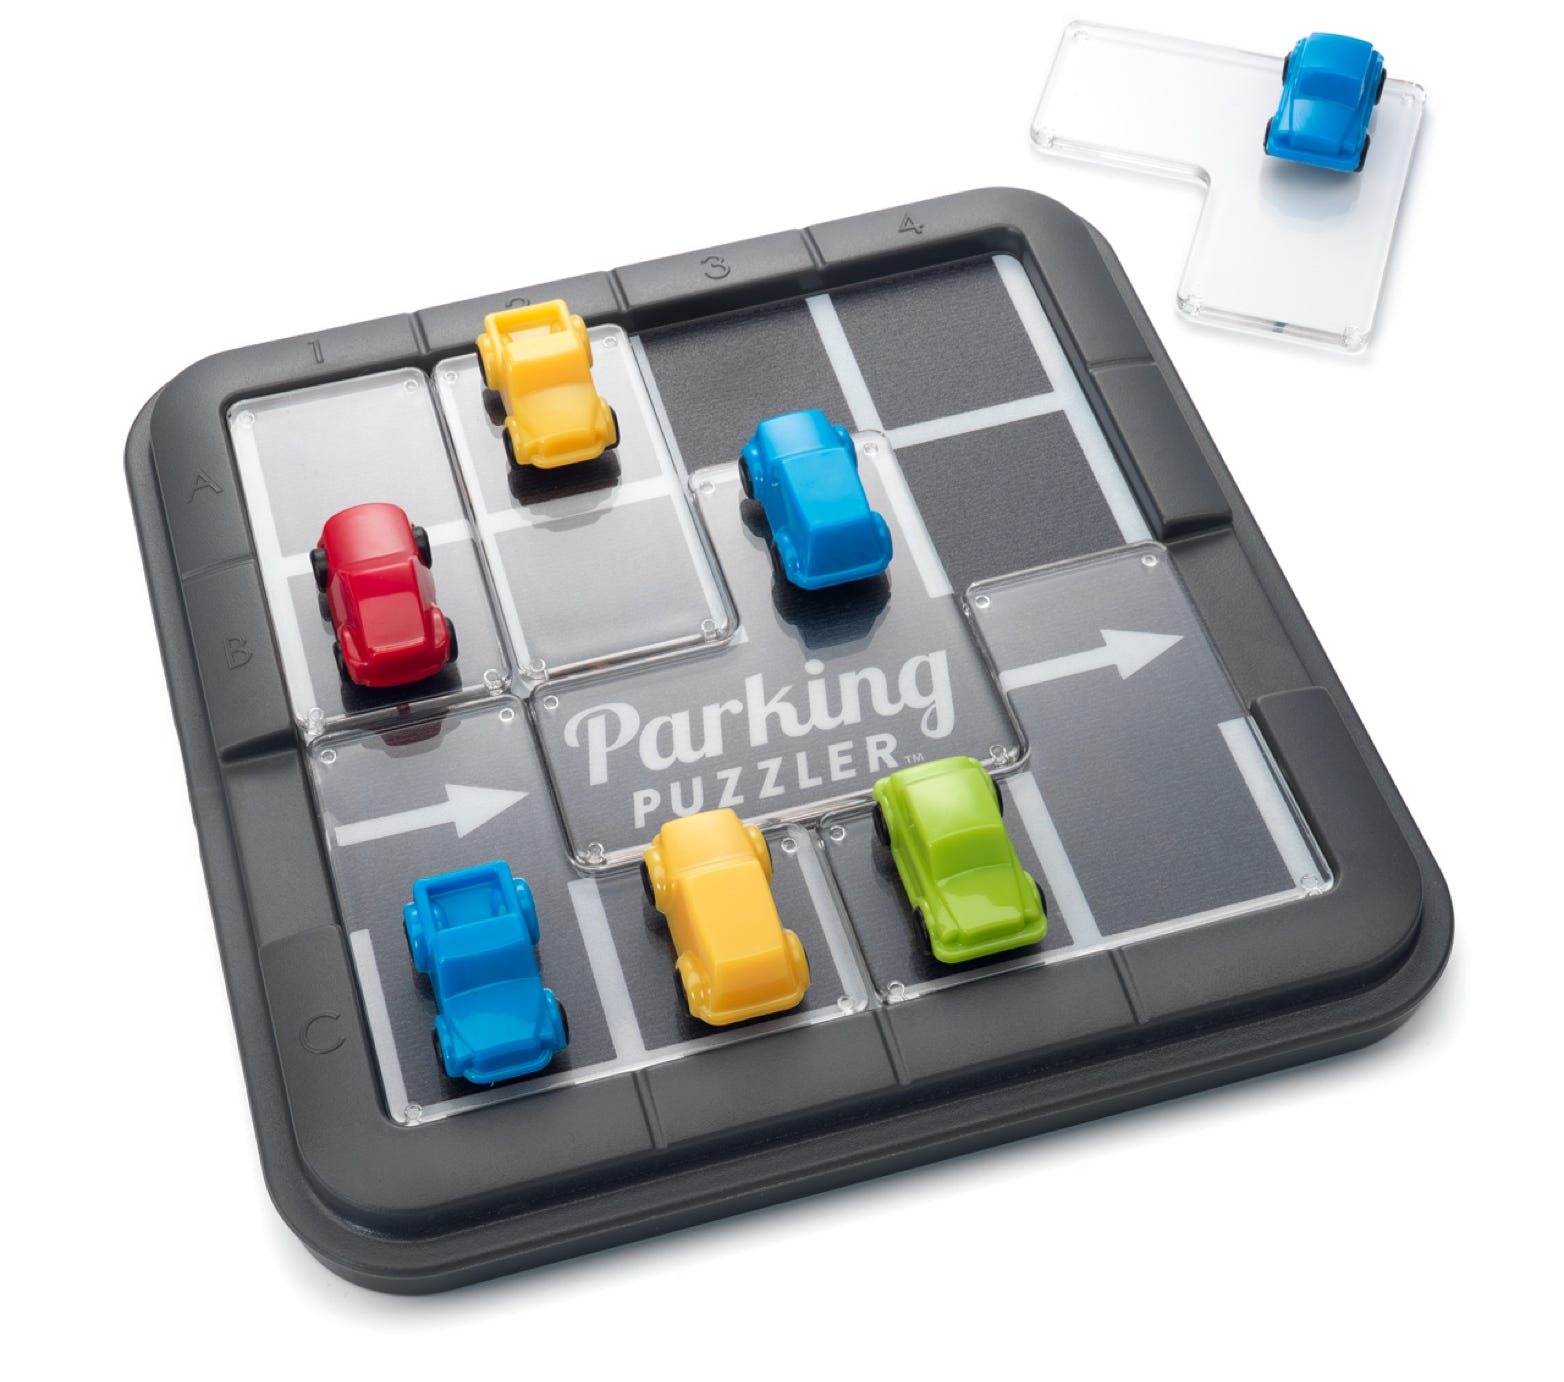 Parking Puzzler, a logic puzzle game designed by Raf Peeters